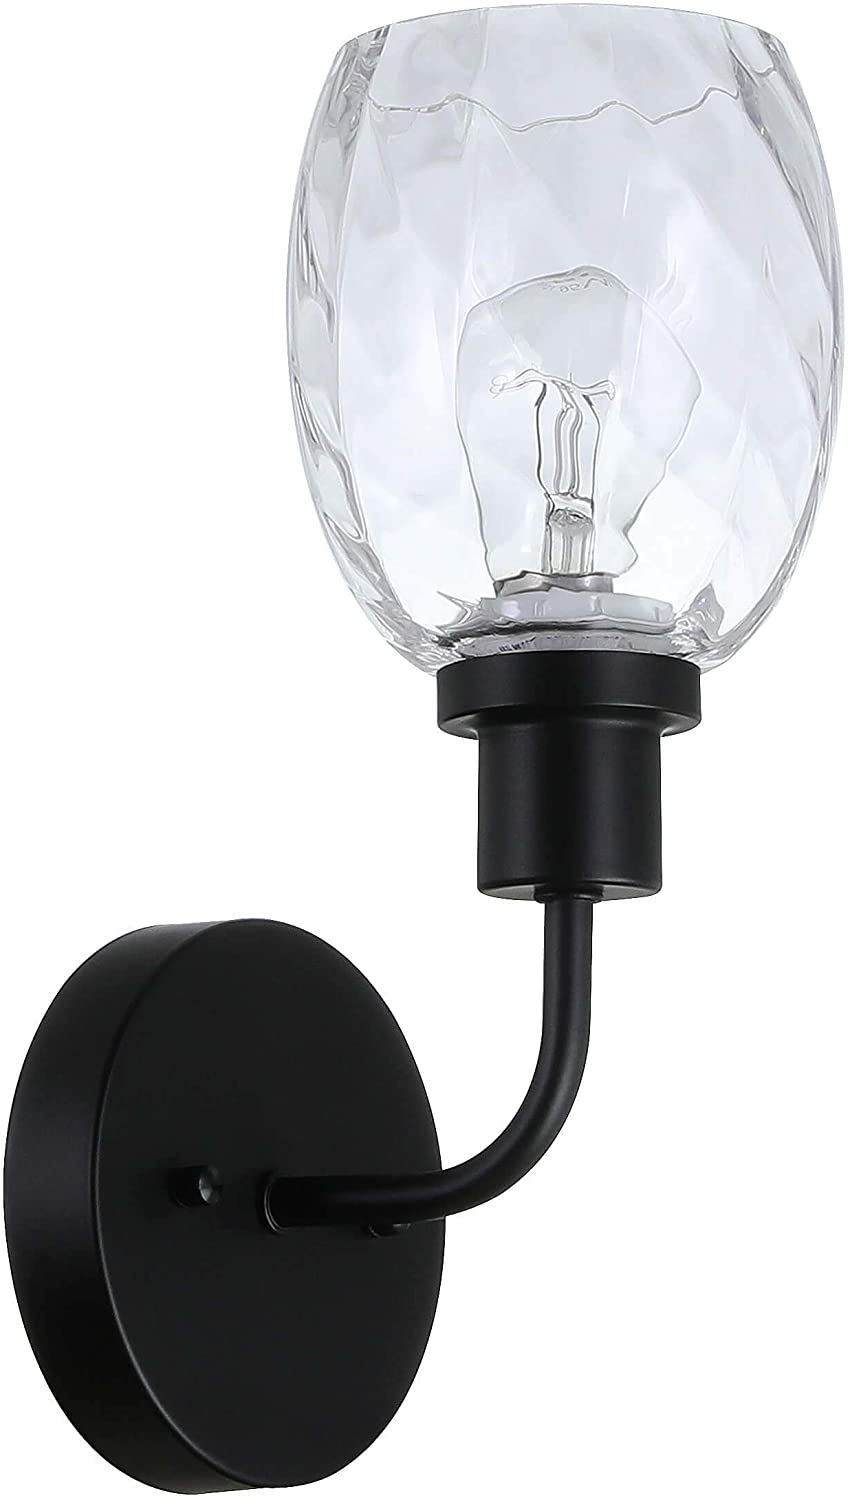 2 pack black arm wall light glass wall sconce with glass shade